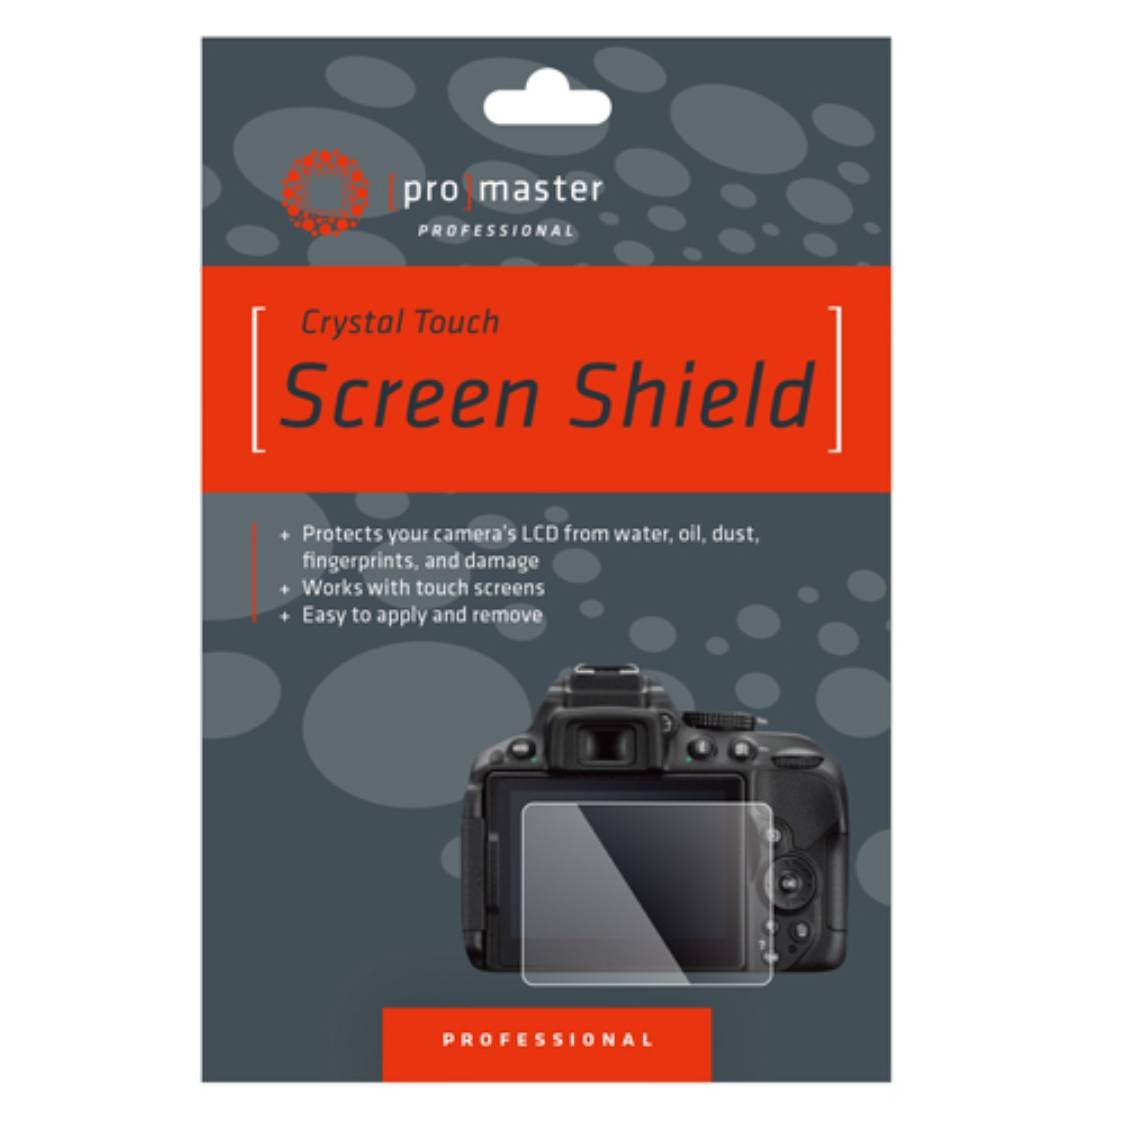 Promaster Crystal Touch Screen Protector (Sony A7, A7R, A7S, RX100, RX10, RX1)